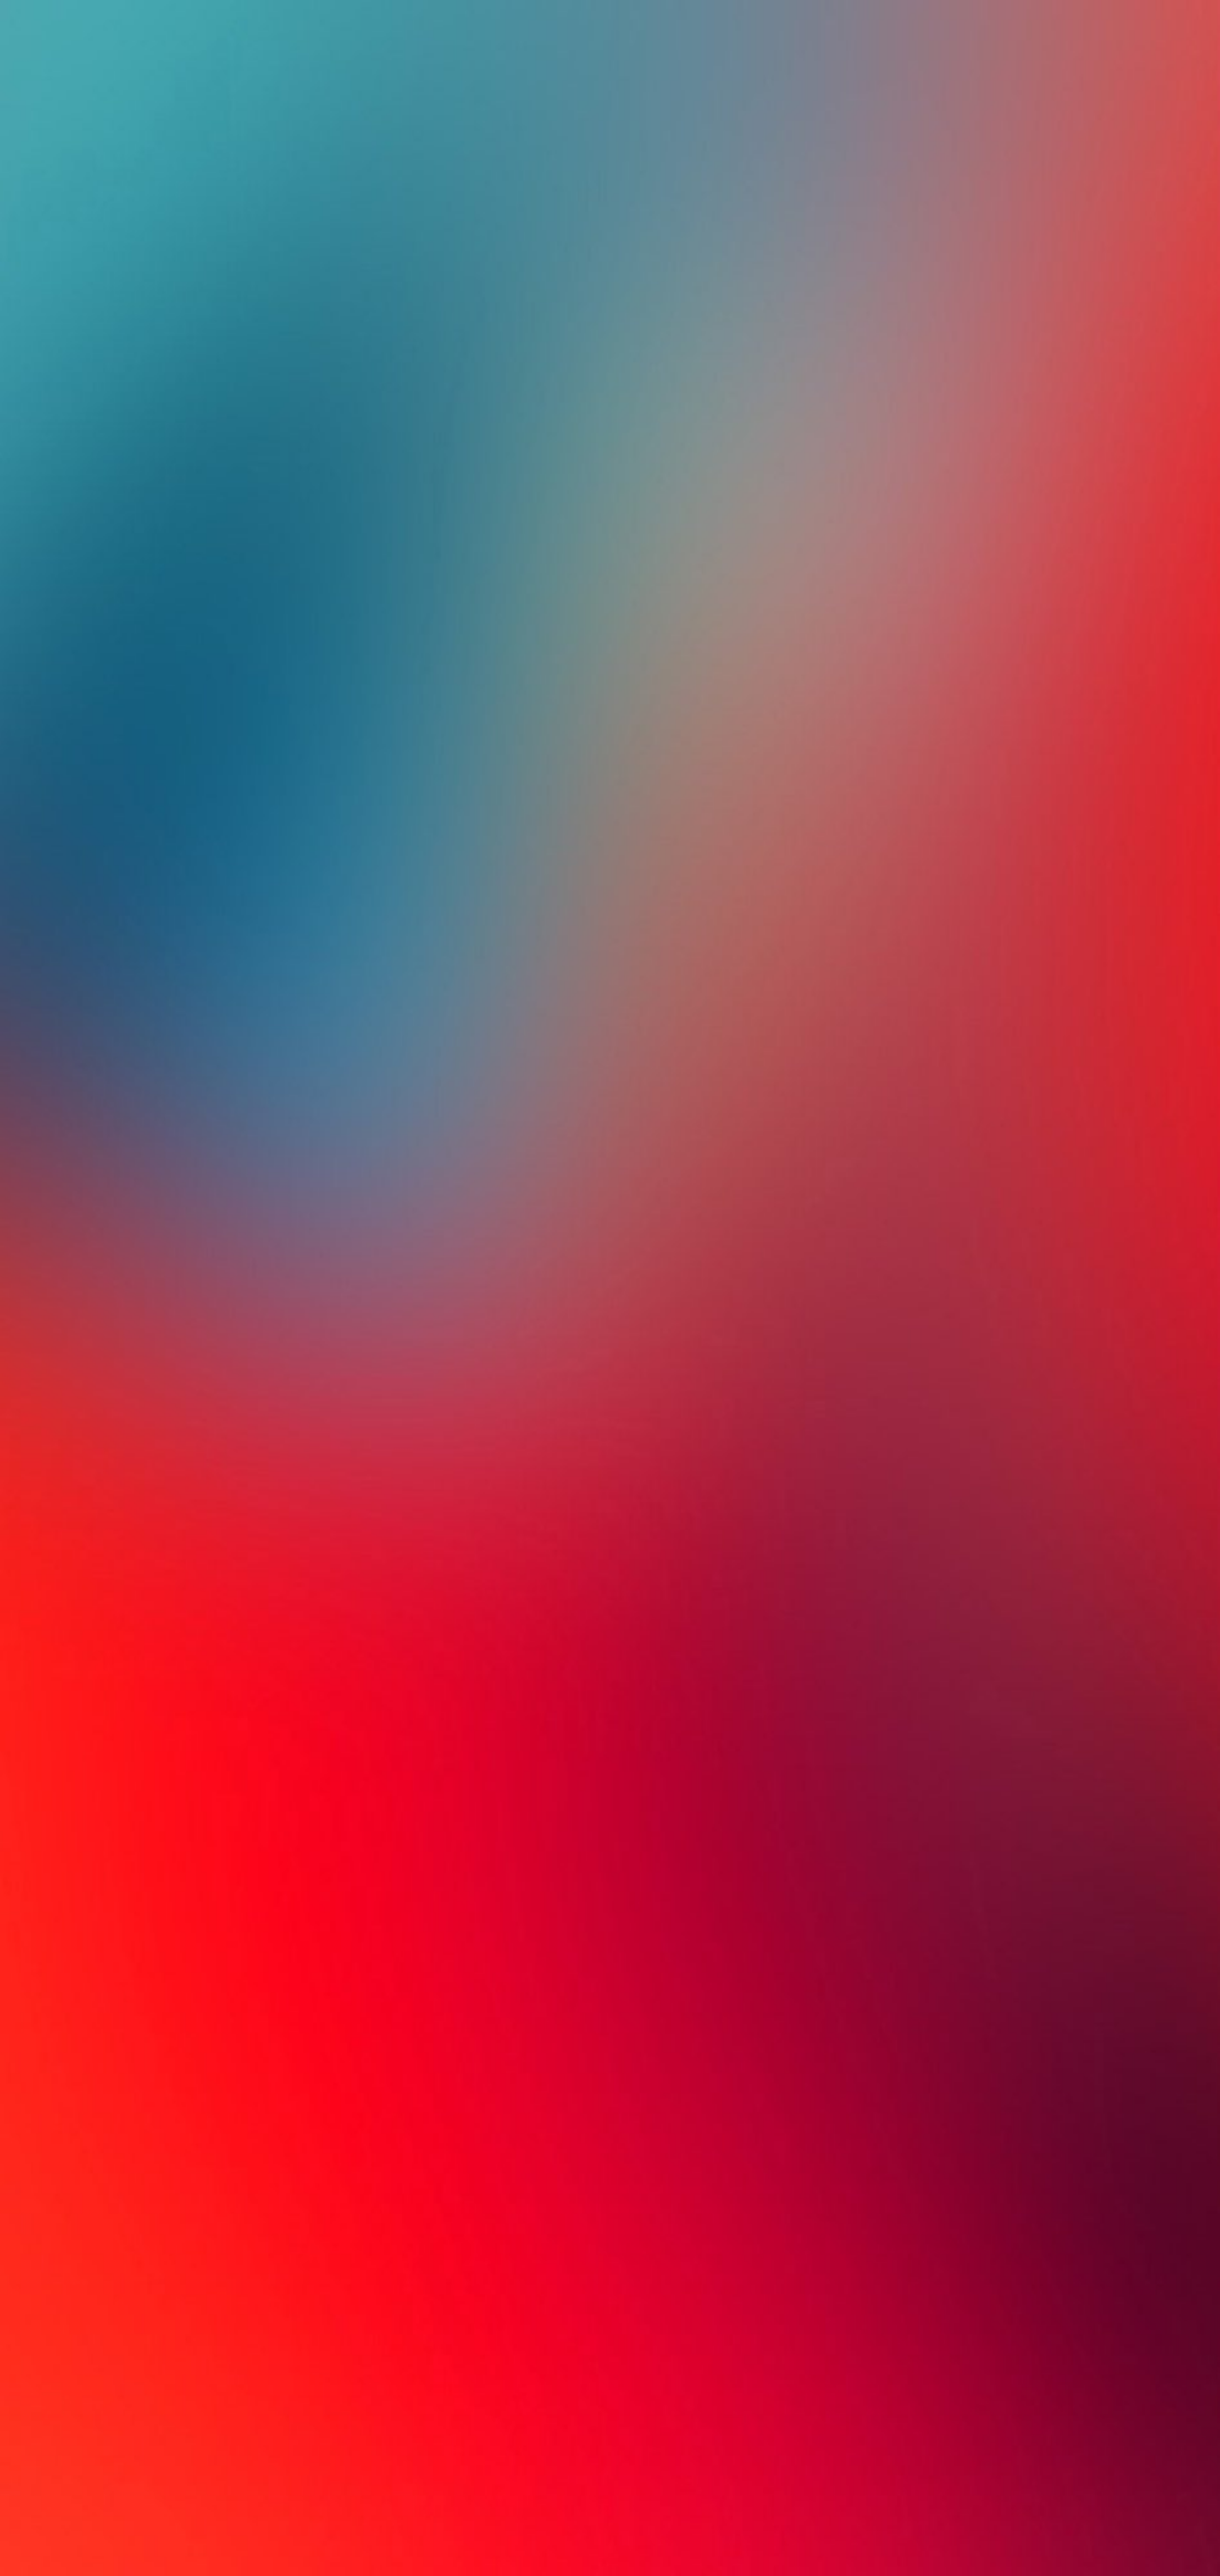 iPhone 12 Pro Wallpapers